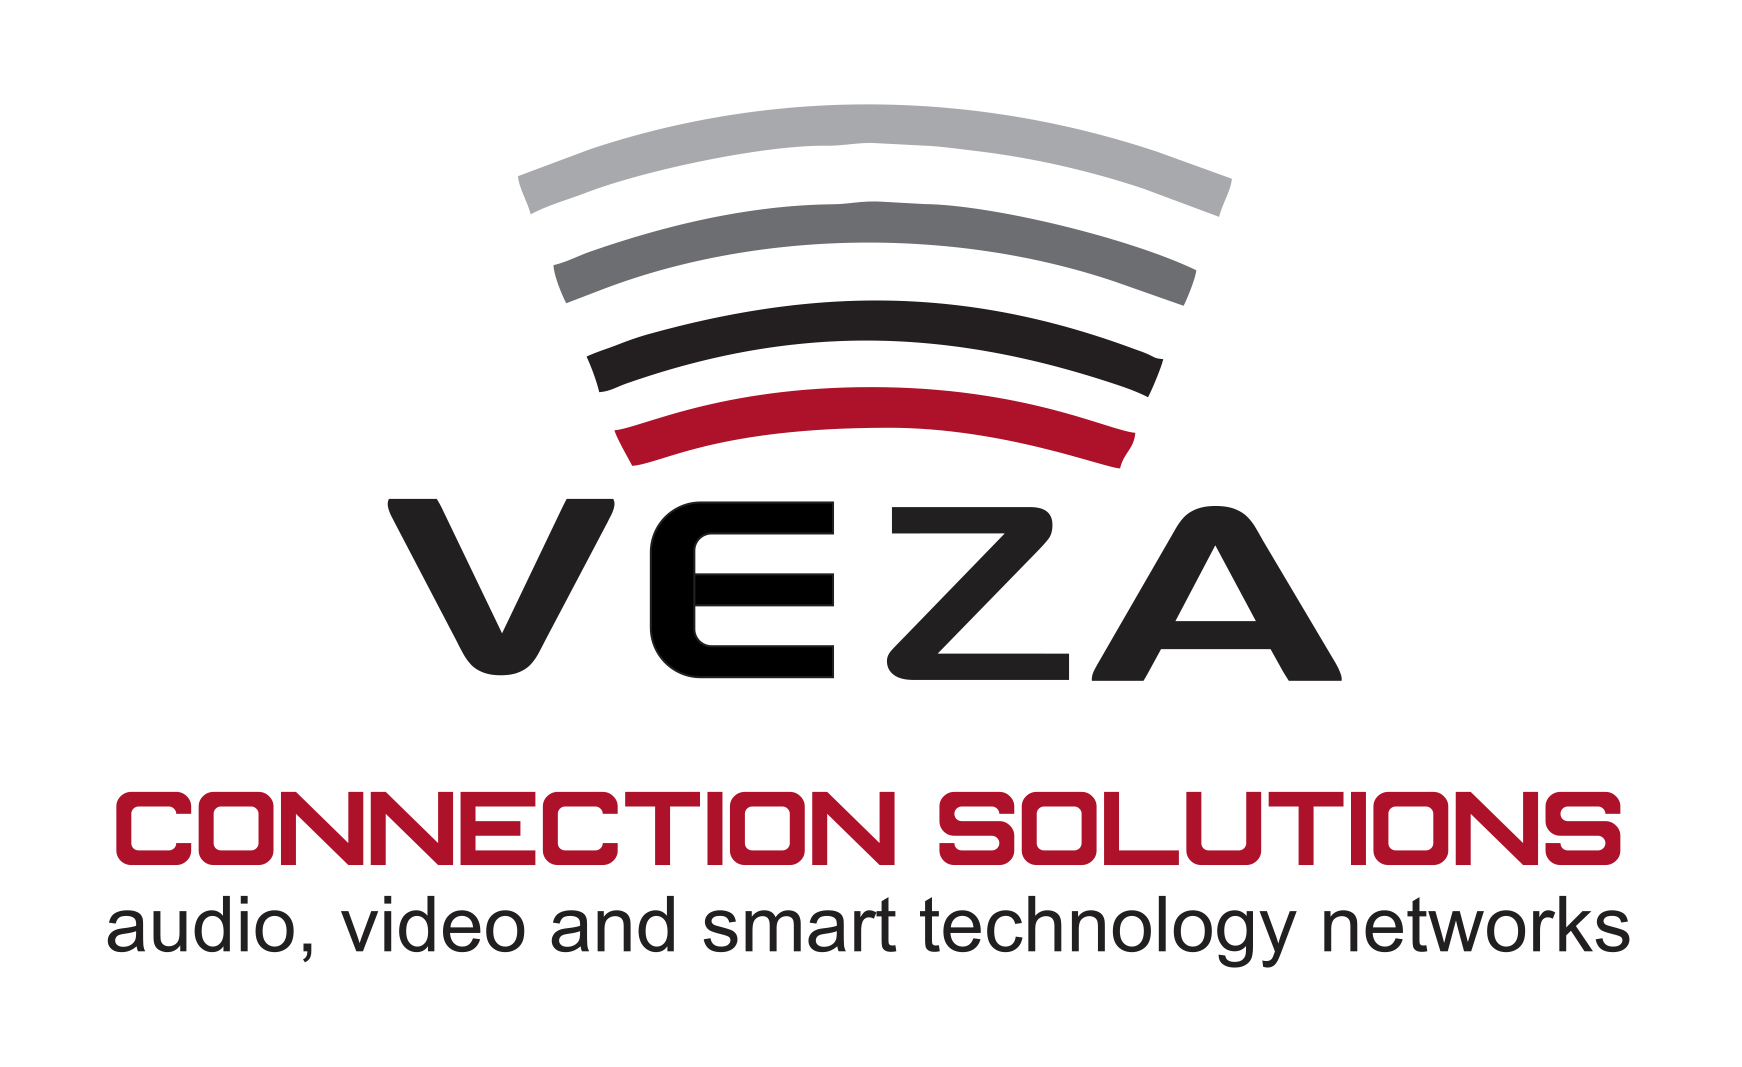 VEZA CONNECTION SOLUTIONS